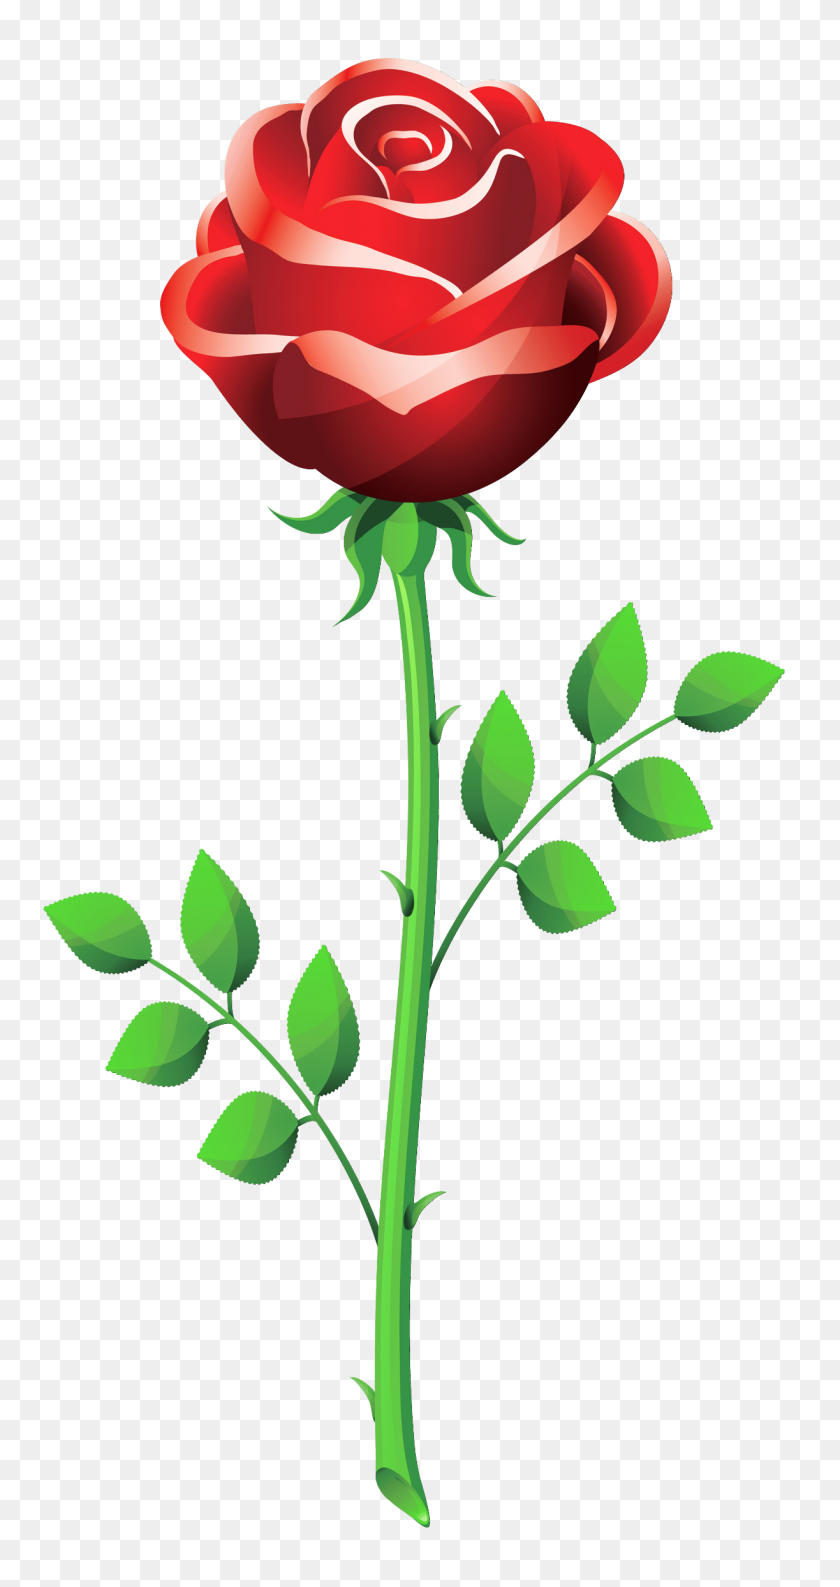 1223x2395 Long Stem Red Rose Beauty And The Beast Clip Art - Beauty And The Beast Clipart Rose